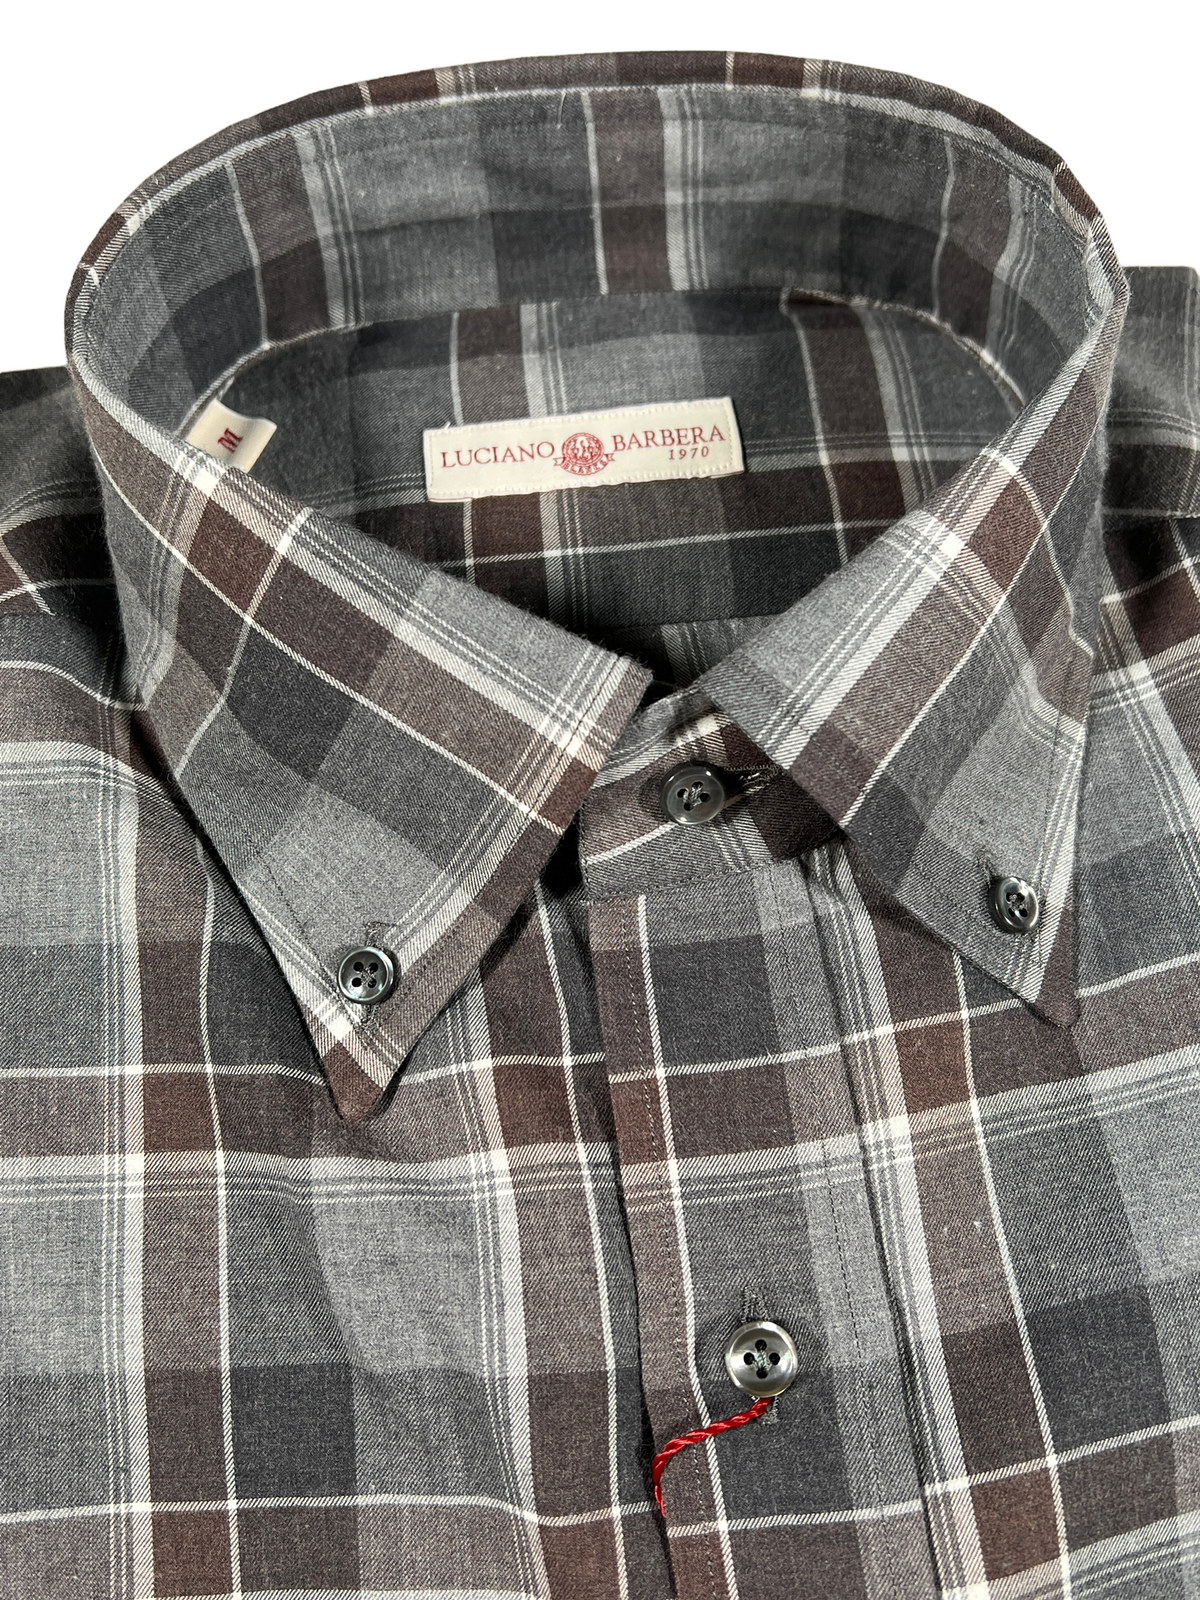 LUCIANO BARBERA PLAID SHIRT - GREY WITH RUST